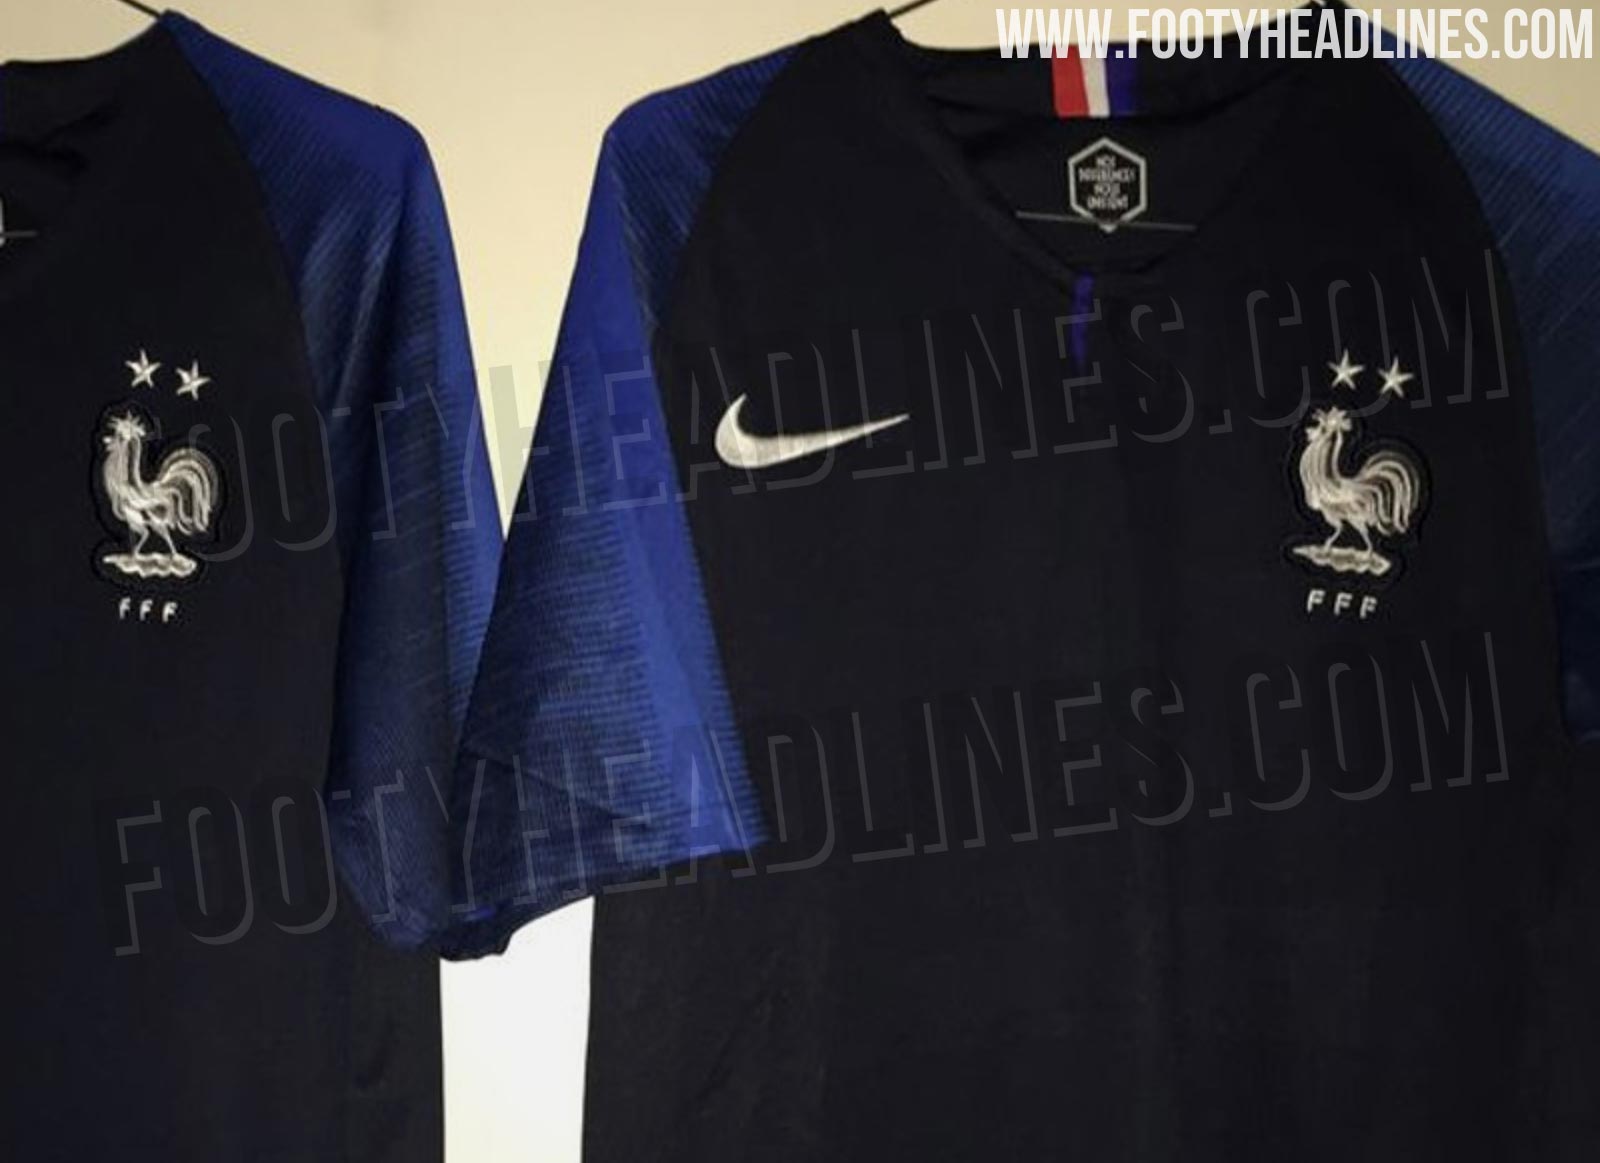 Roca Inconveniencia Laboratorio Exclusive Pics: Nike Produces Two-Star France Shirts to Be Ready on Monday  - Footy Headlines